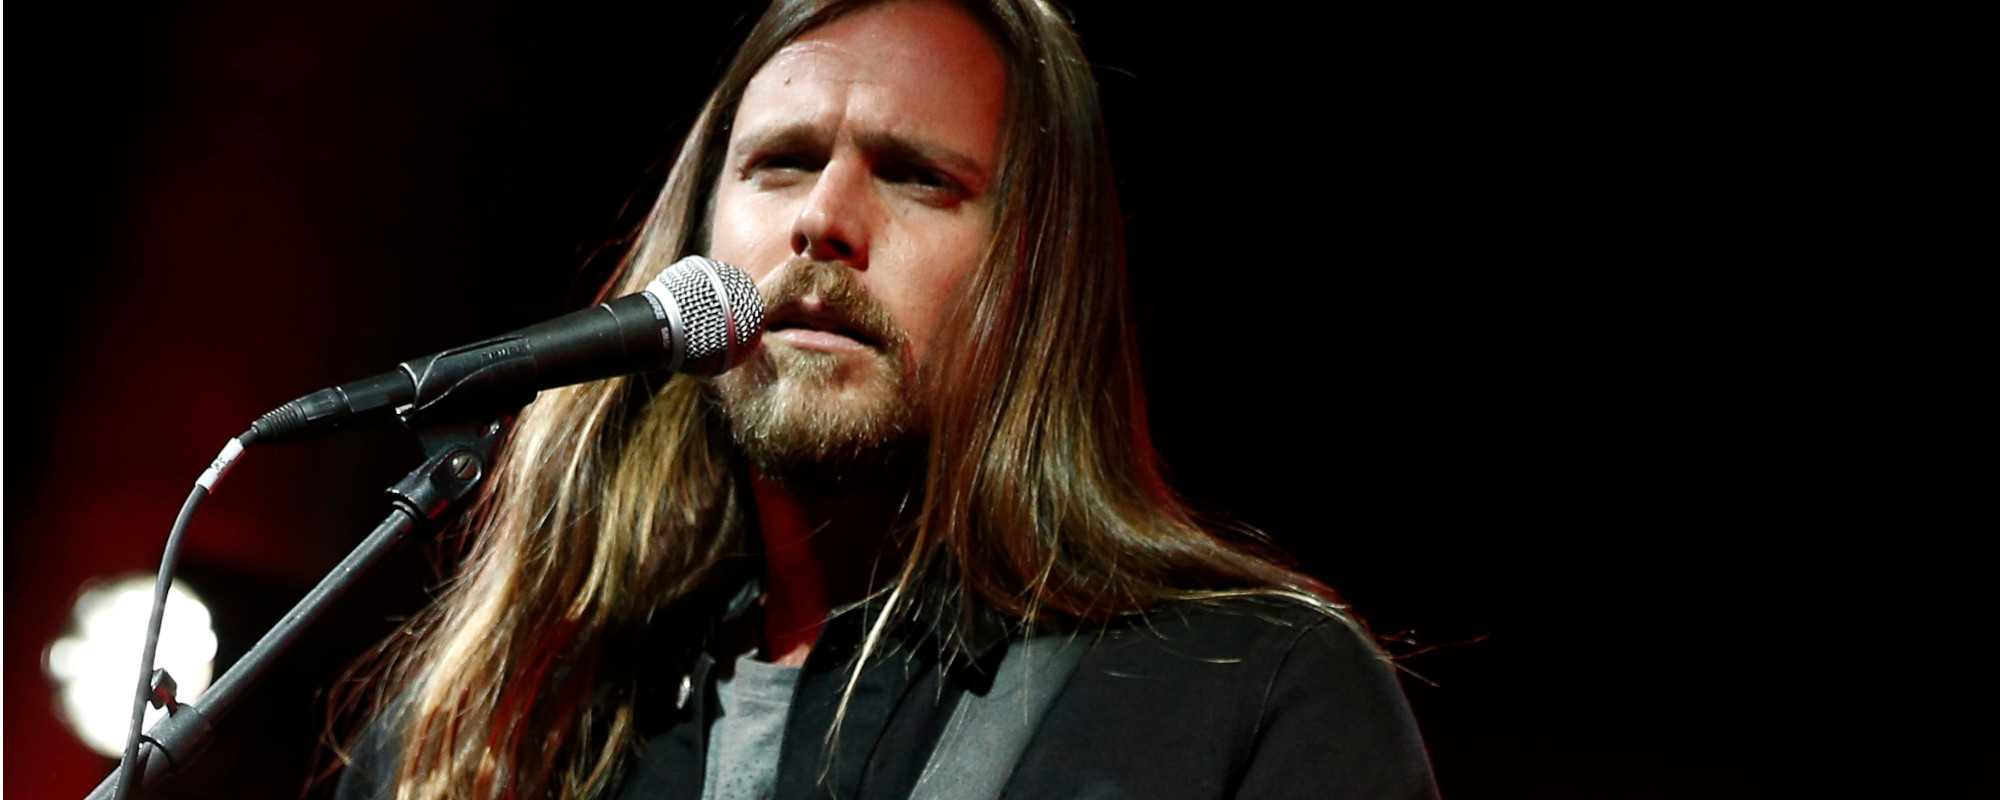 Willie Nelson’s Son Lukas Victim of Grand Theft Auto Incident While on Tour in Seattle